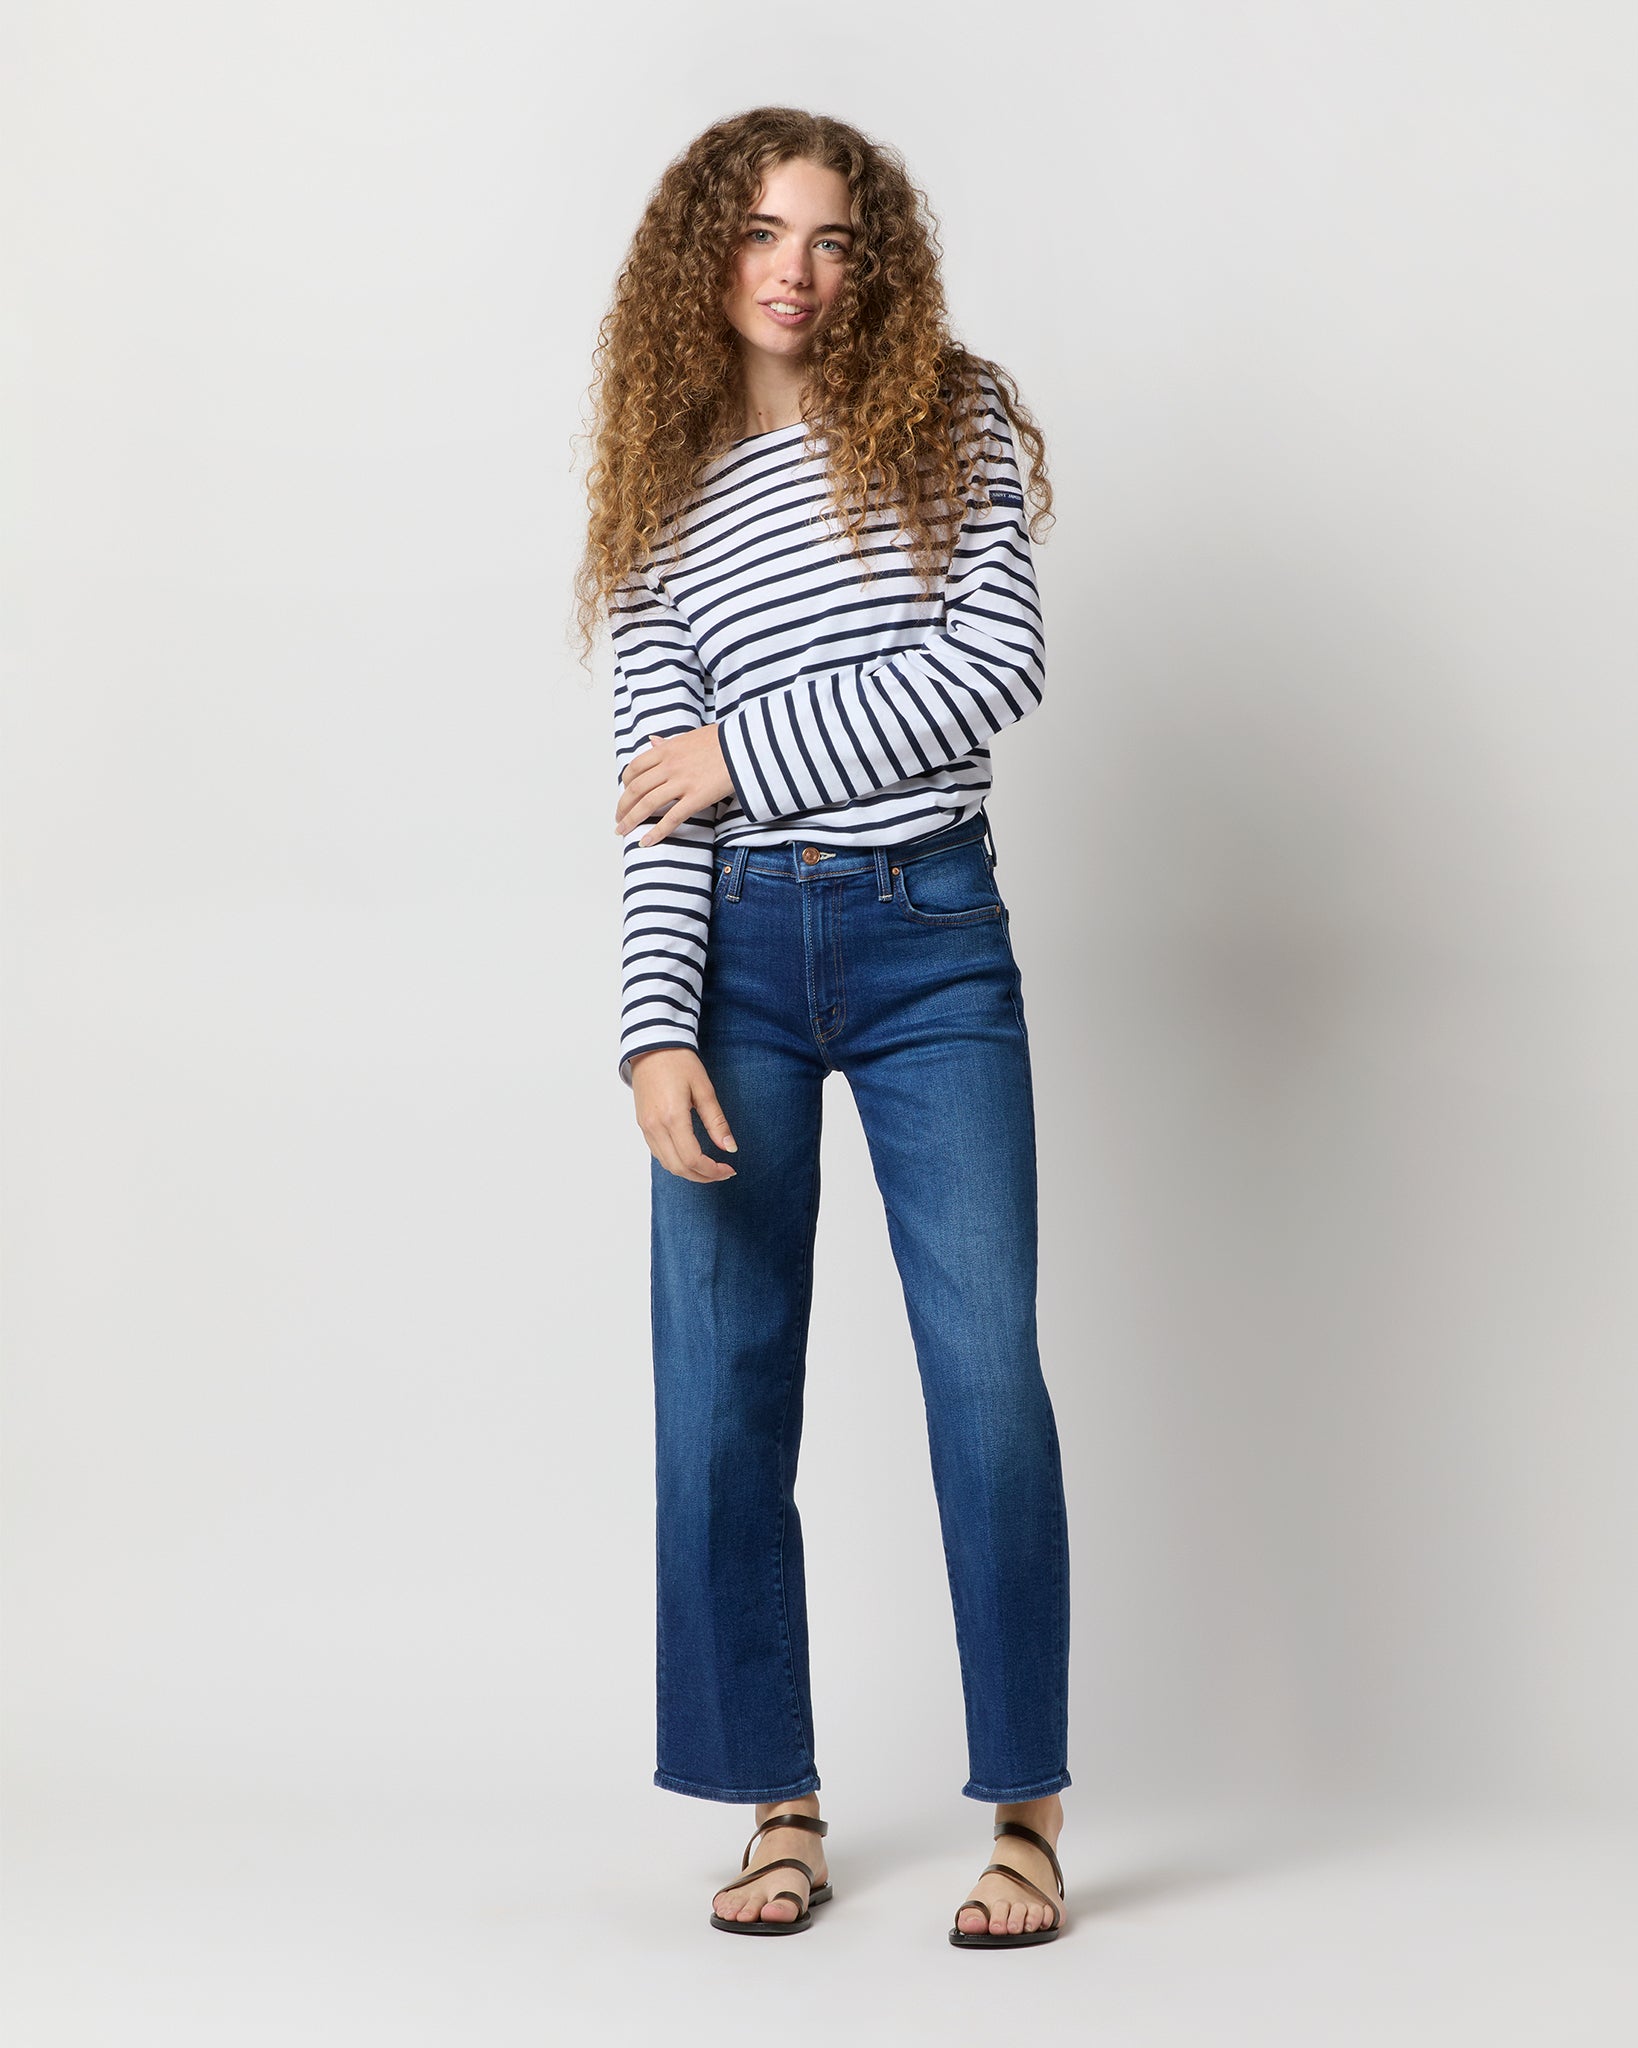 The Mid Rise Ramble Zip Ankle Jean in Coastal Colors